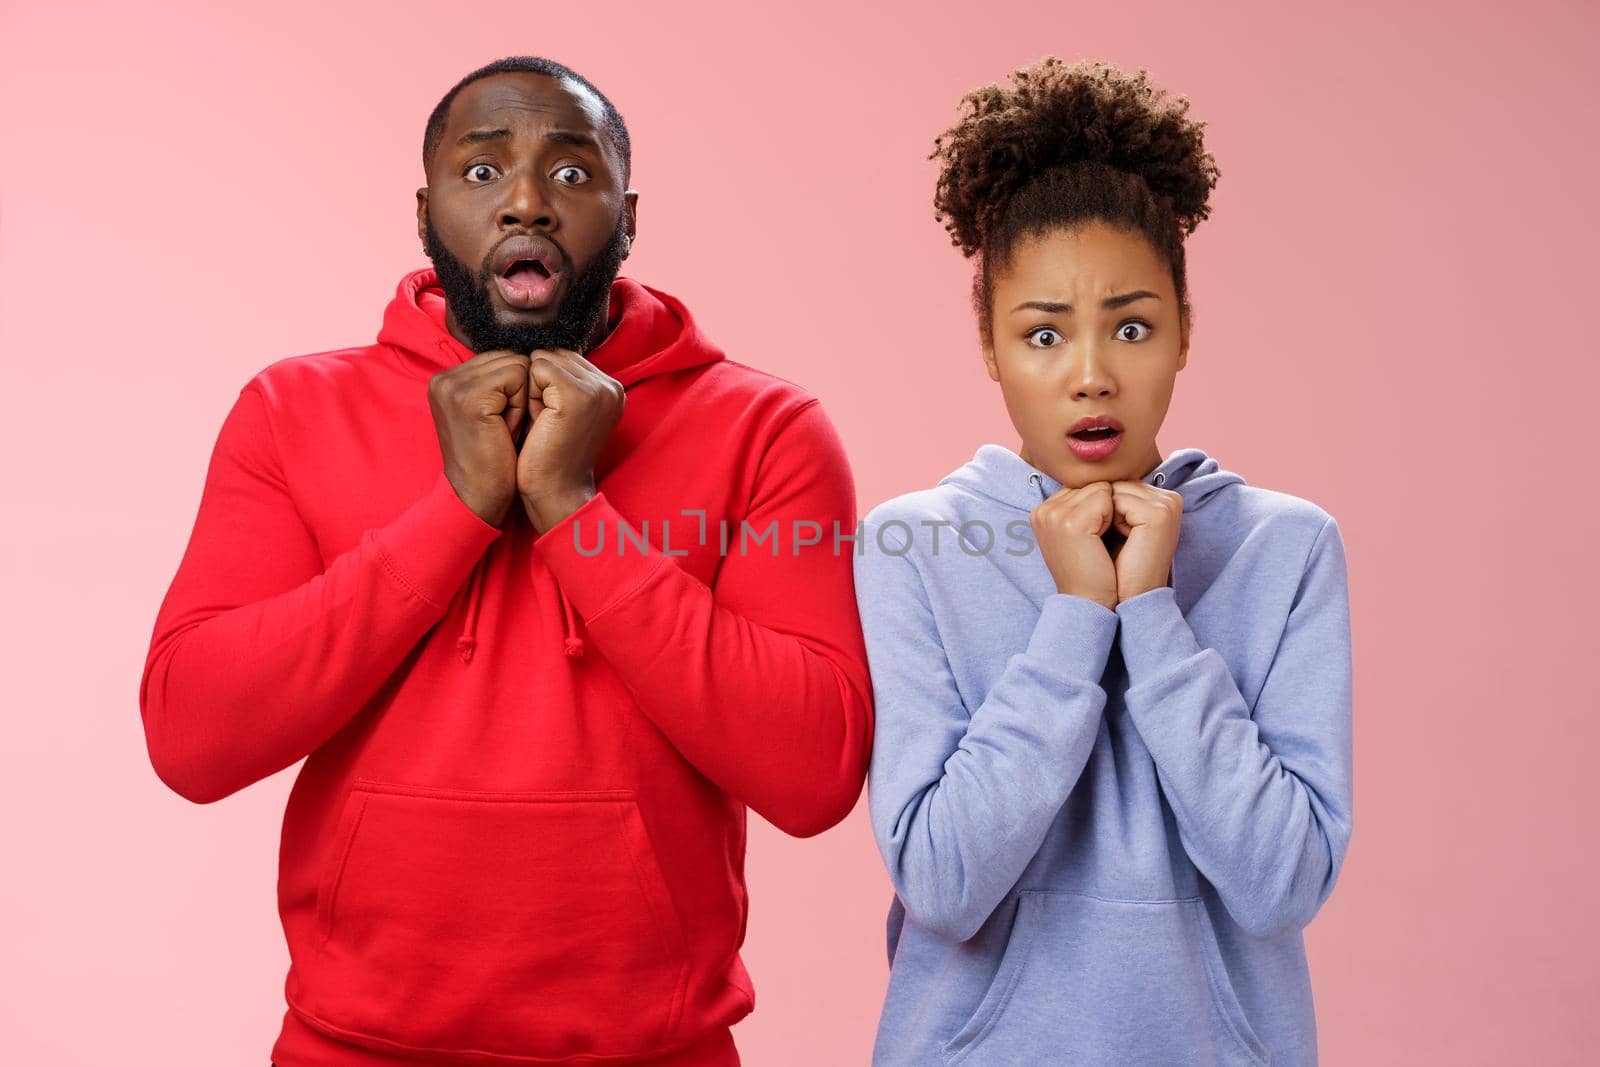 Upset worried two siblings watching together scary disturbing horror movie gasping frowning cringing shock intense emotions press hands chest widen eyes terrified standing nervous pink background.